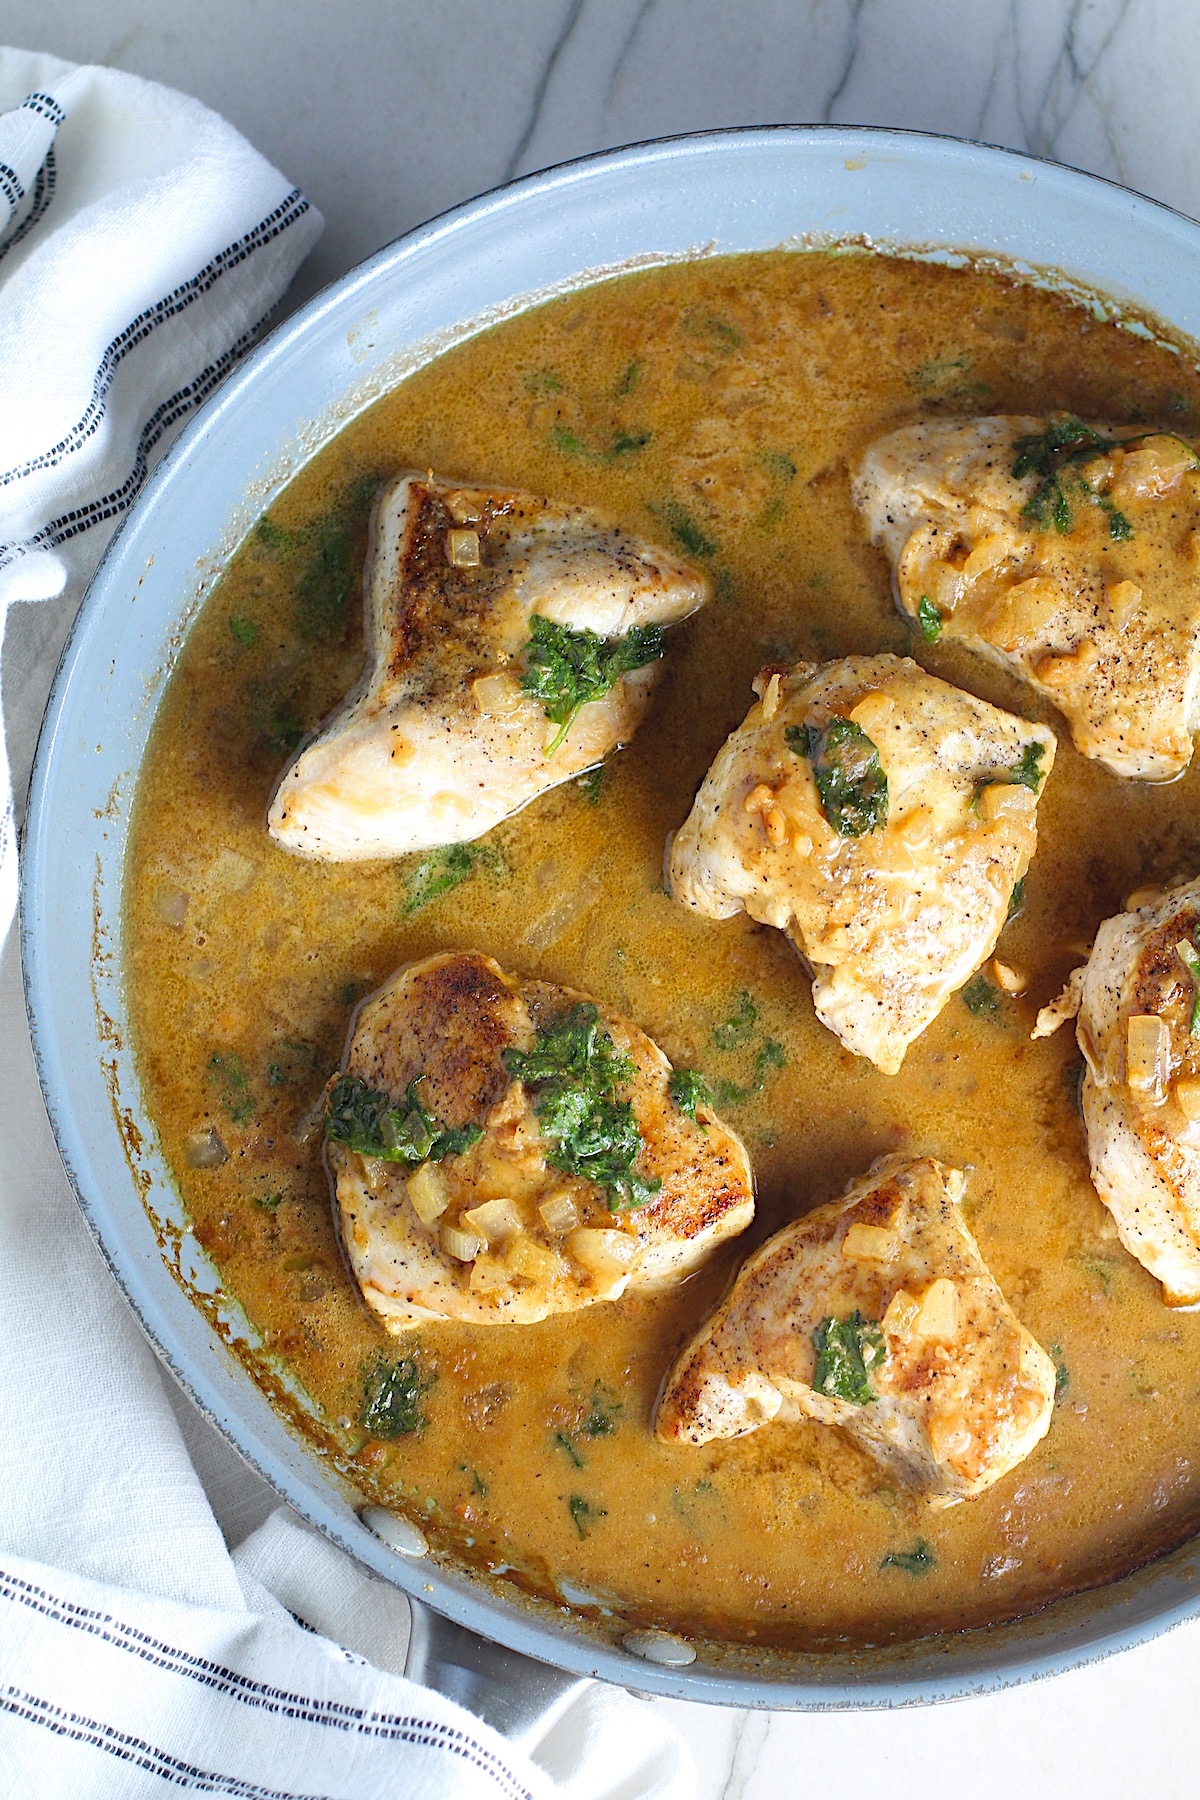 6 pieces of Brazilian Chicken in Peanut Sauce in a pan on counter with dish towel next to it.